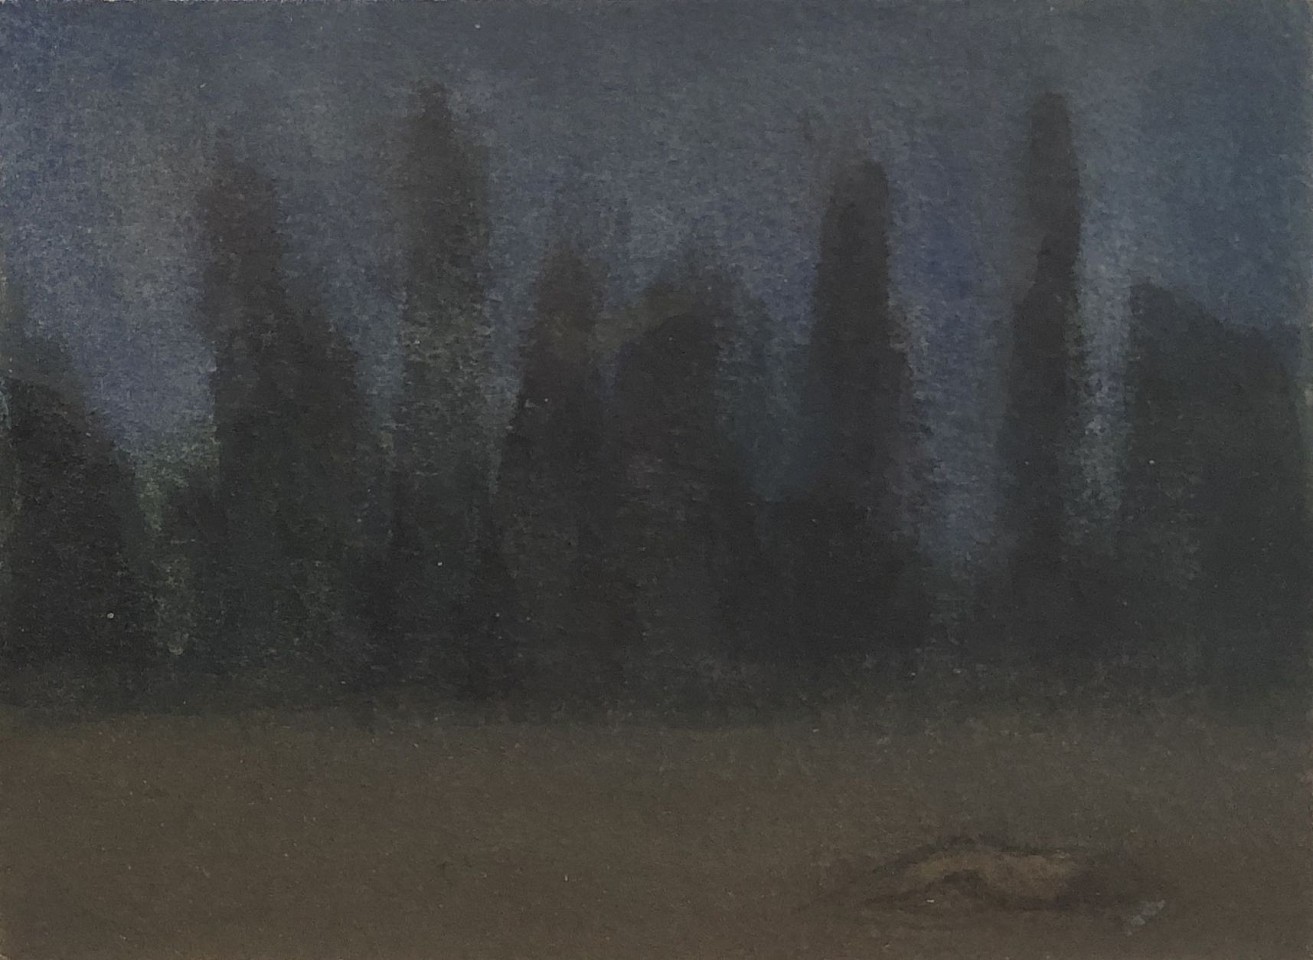 Chuck Bowdish 1959-2022, Night with Figure and Trees
watercolor on paper, 3" x 4.8", 8.75" x 9.75" framed
CB 327
Price Upon Request